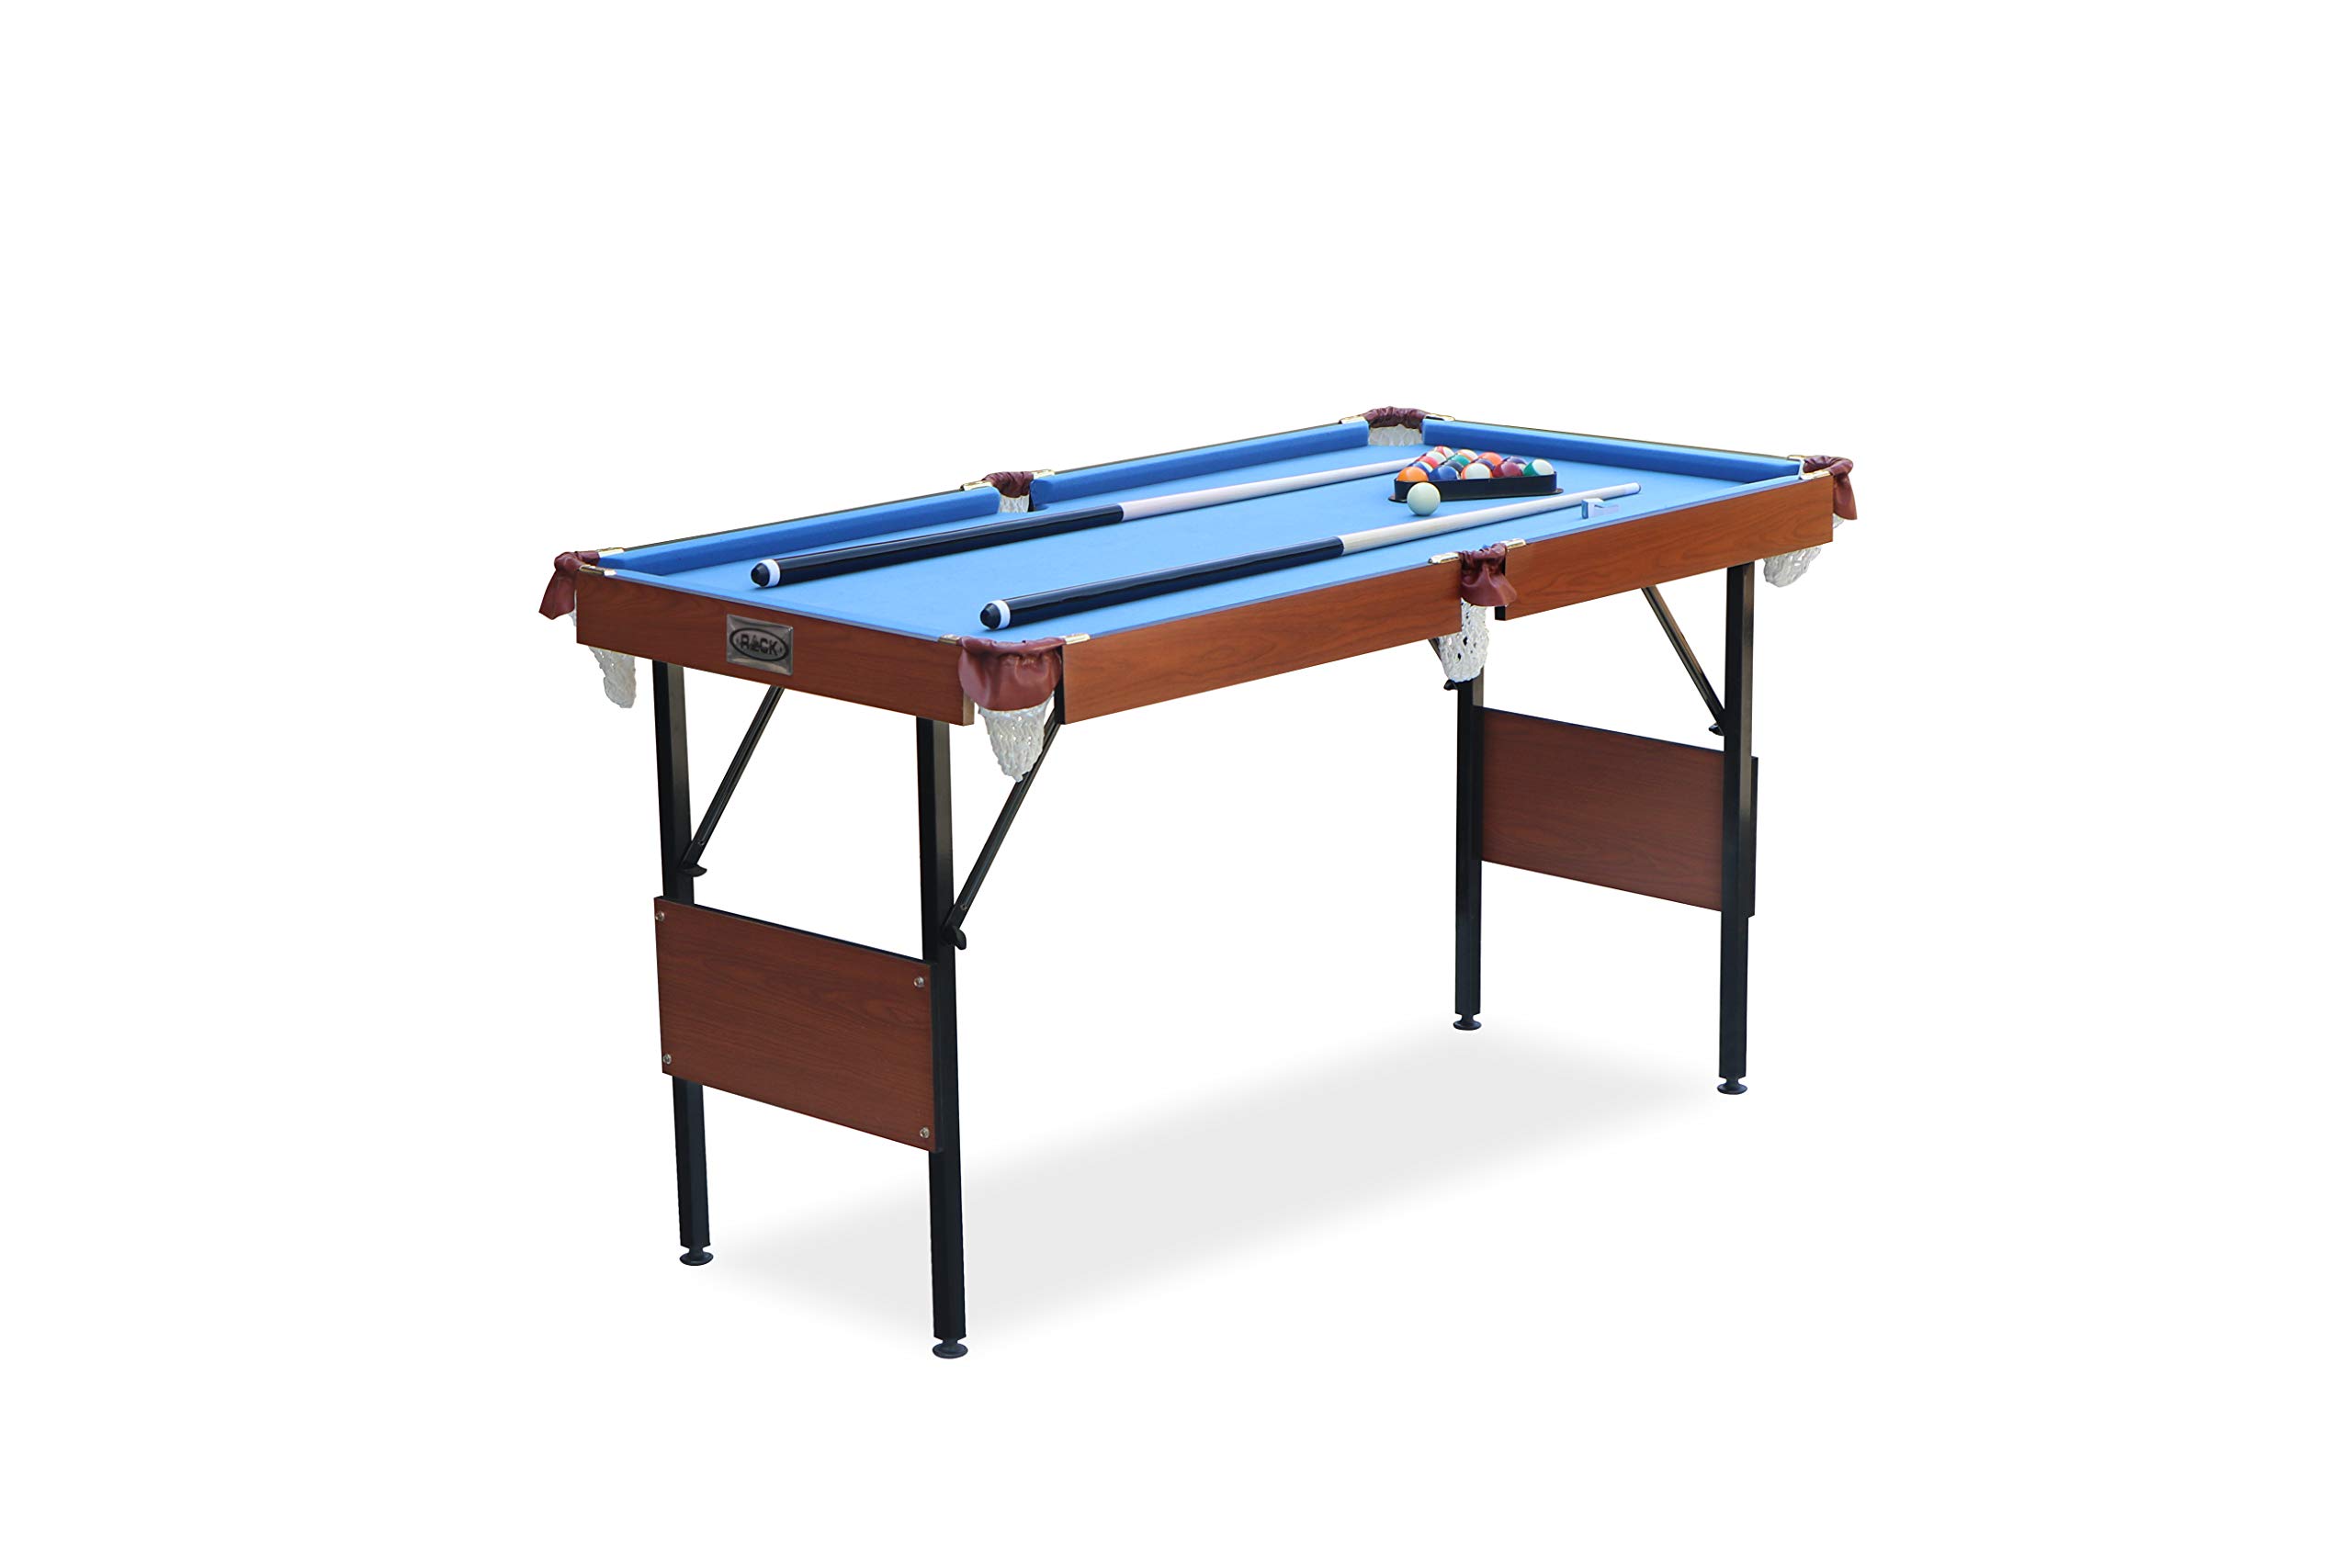 RACK Crux 55-inch Folding Billiard/Pool Table - Portable and Space-Saving Entertainment!